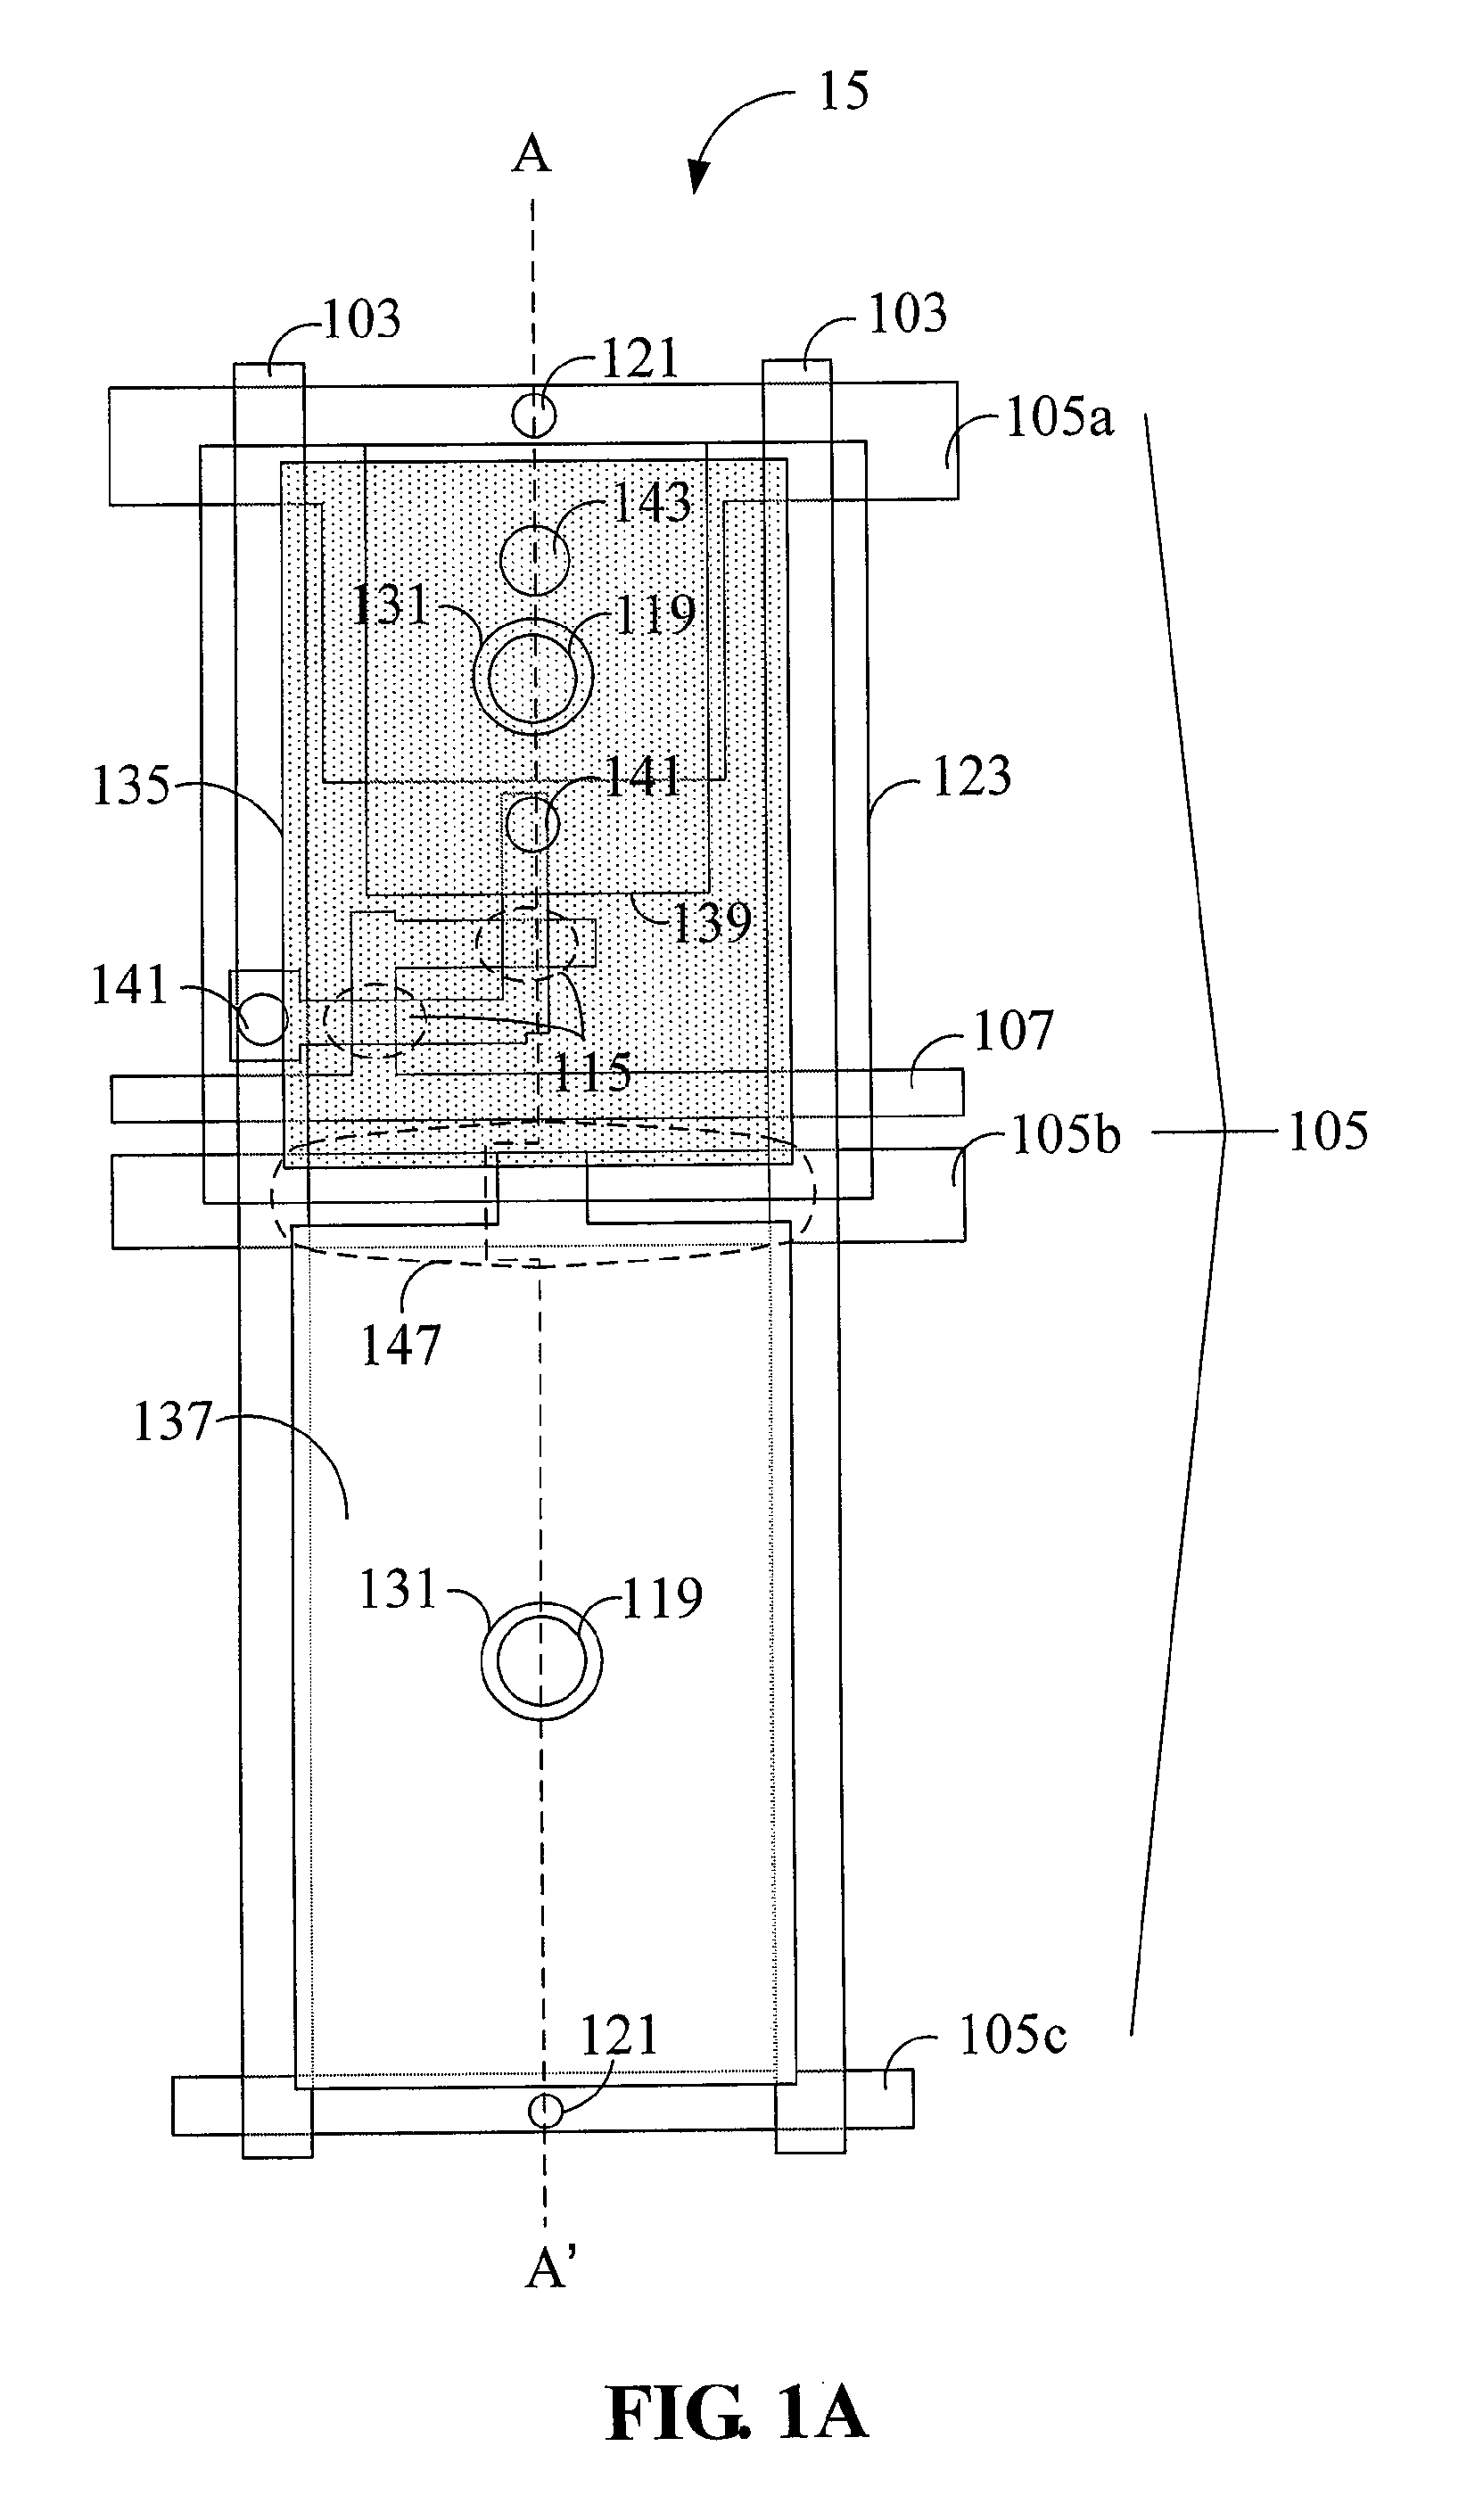 Display Panel, Electro-Optical Device, and Methods for Fabricating the Same